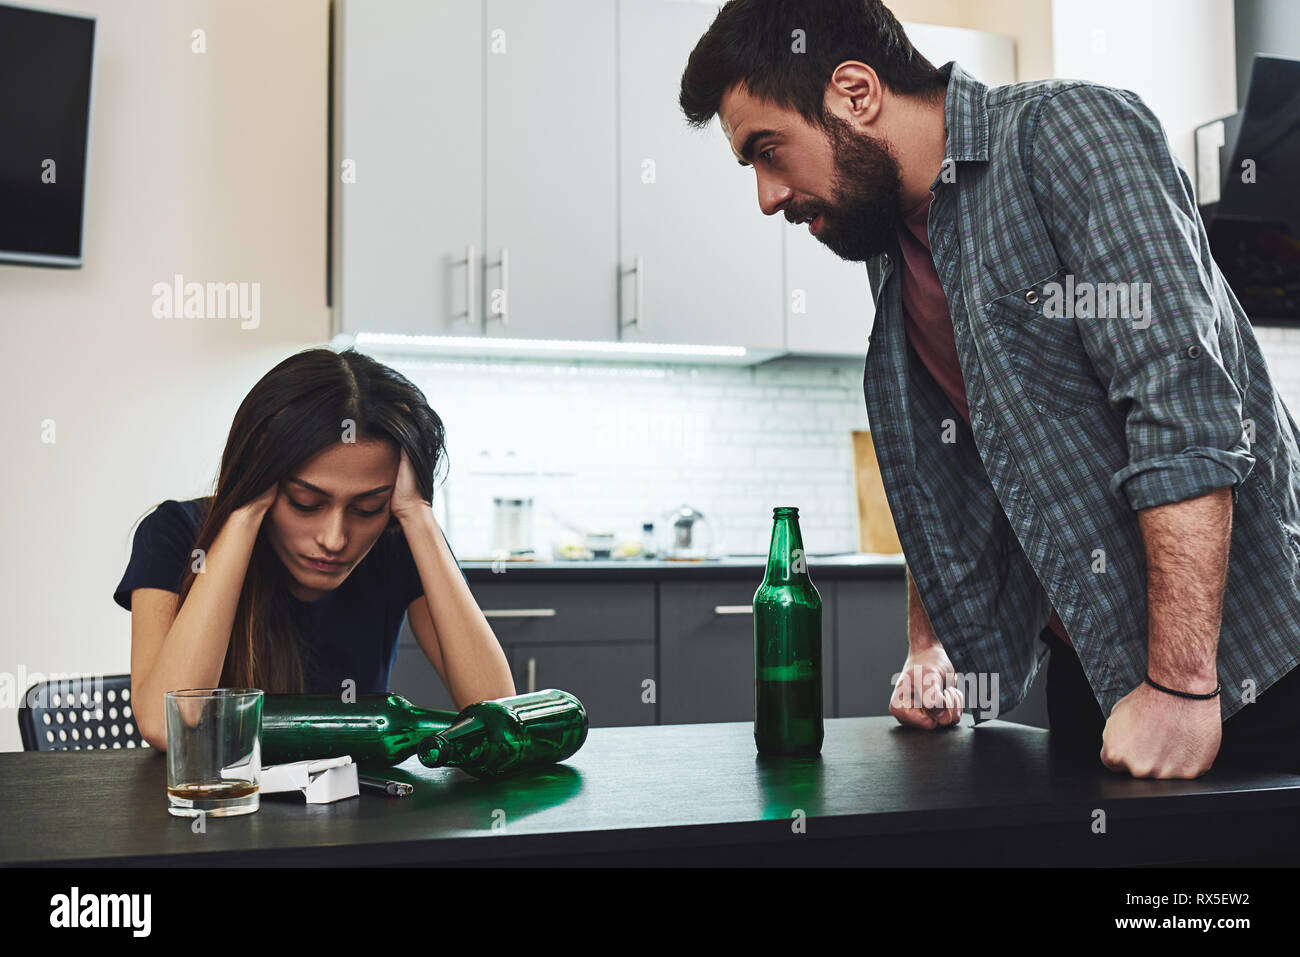 Drunkard. Angry man feeling despair while shouting at his drunk wife sitting in the kitchen. Empty bottles are on the table. Stock Photo